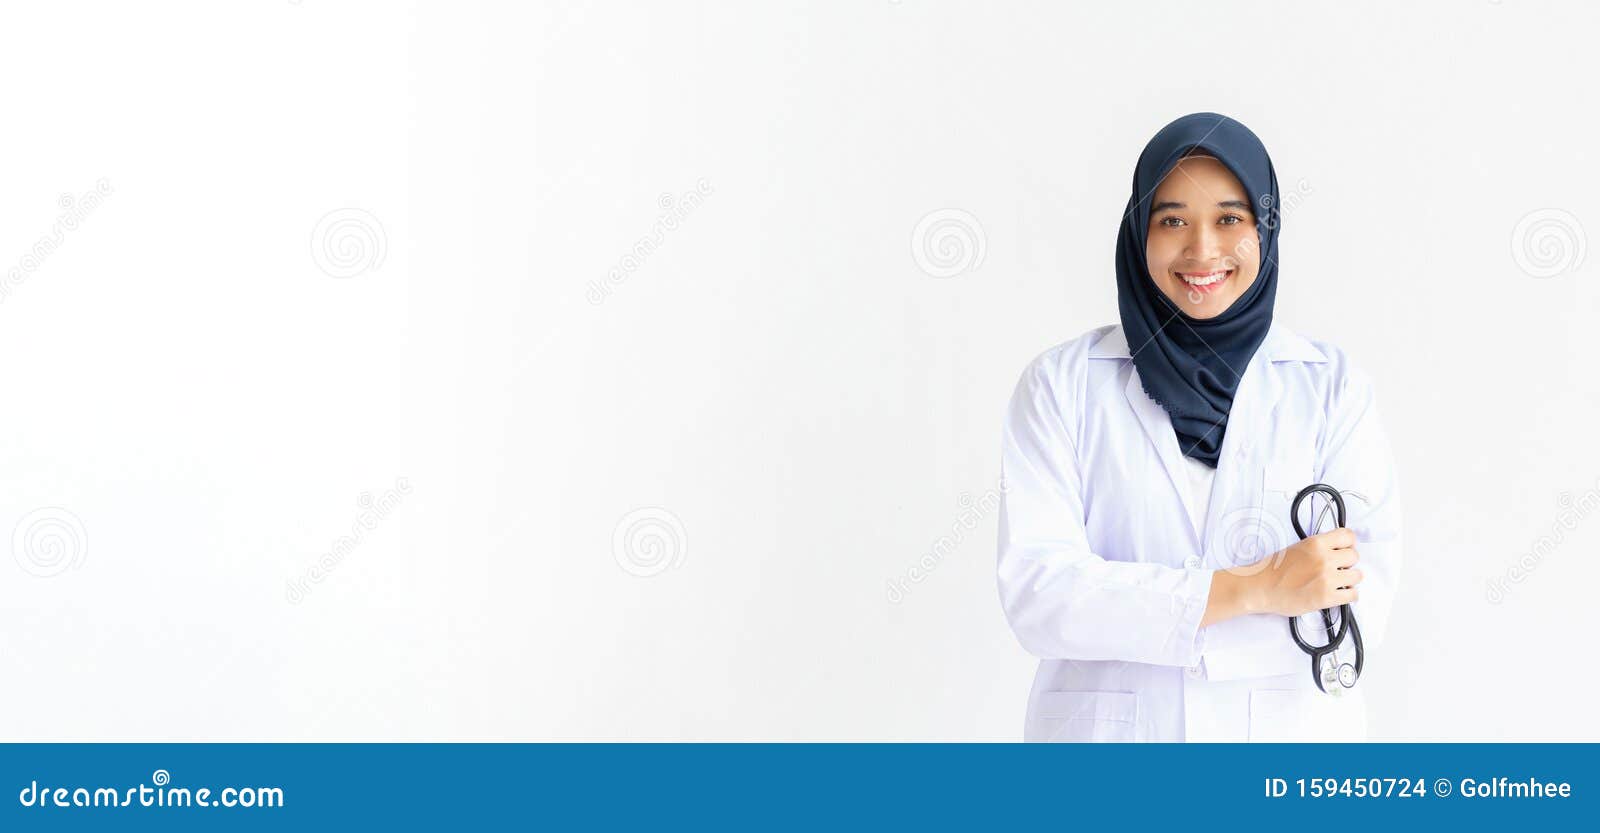 young arab muslim intern doctor women smile on isolate white background concept for islam people working in medical hospital healt